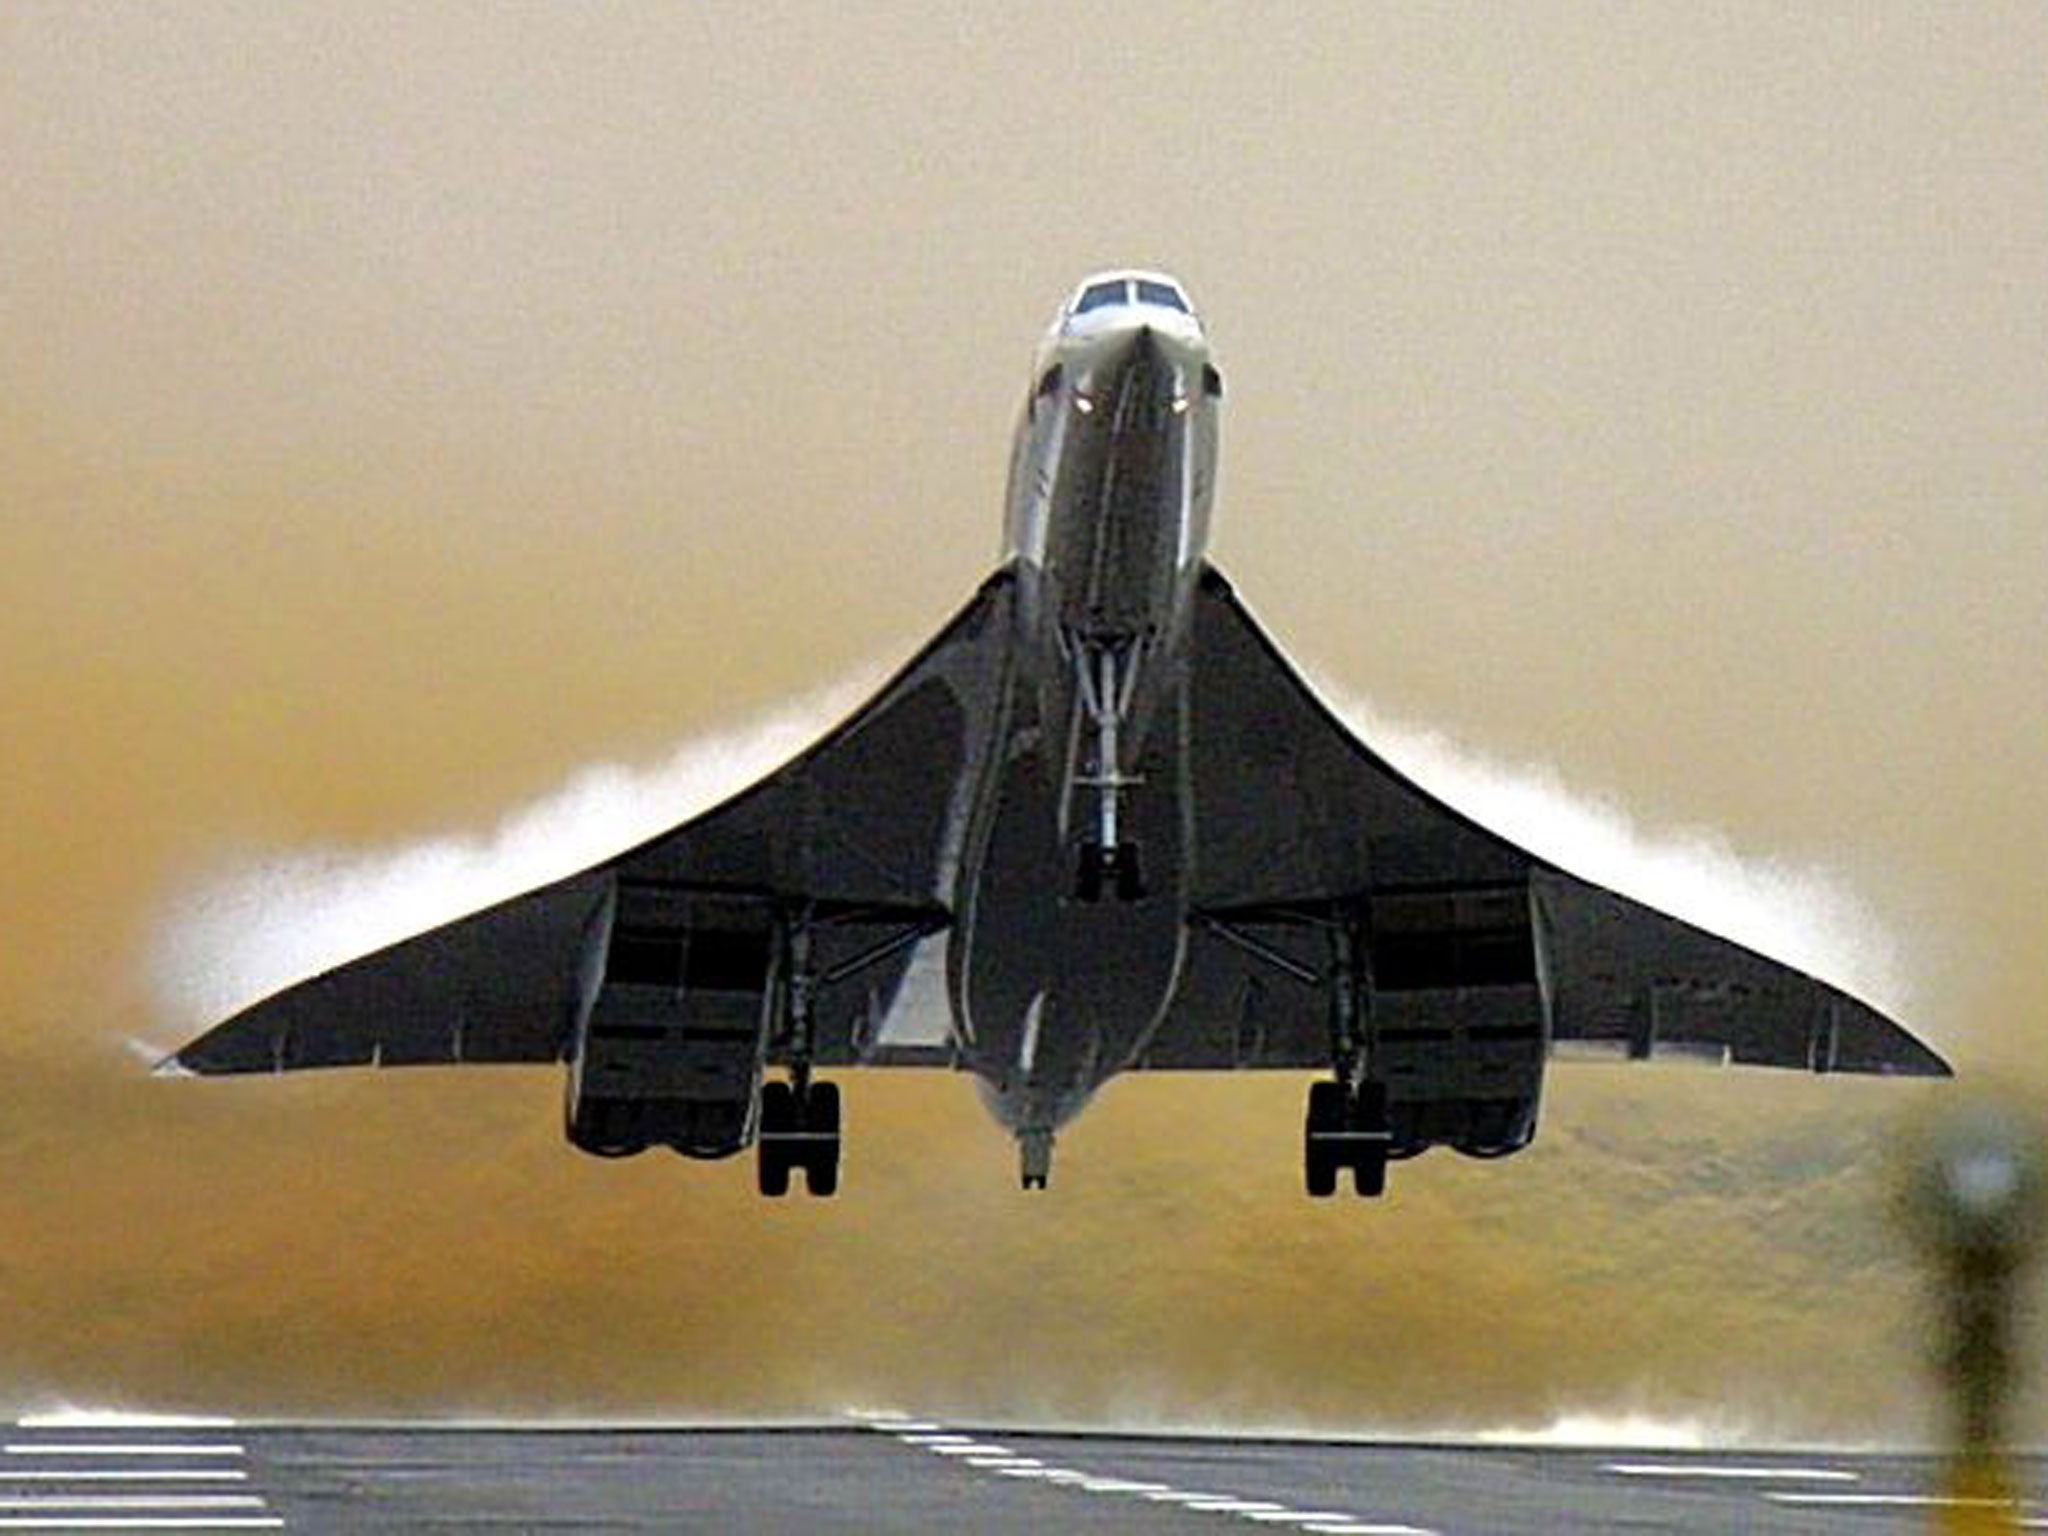 Gone west: Concorde stopped flying in 2003